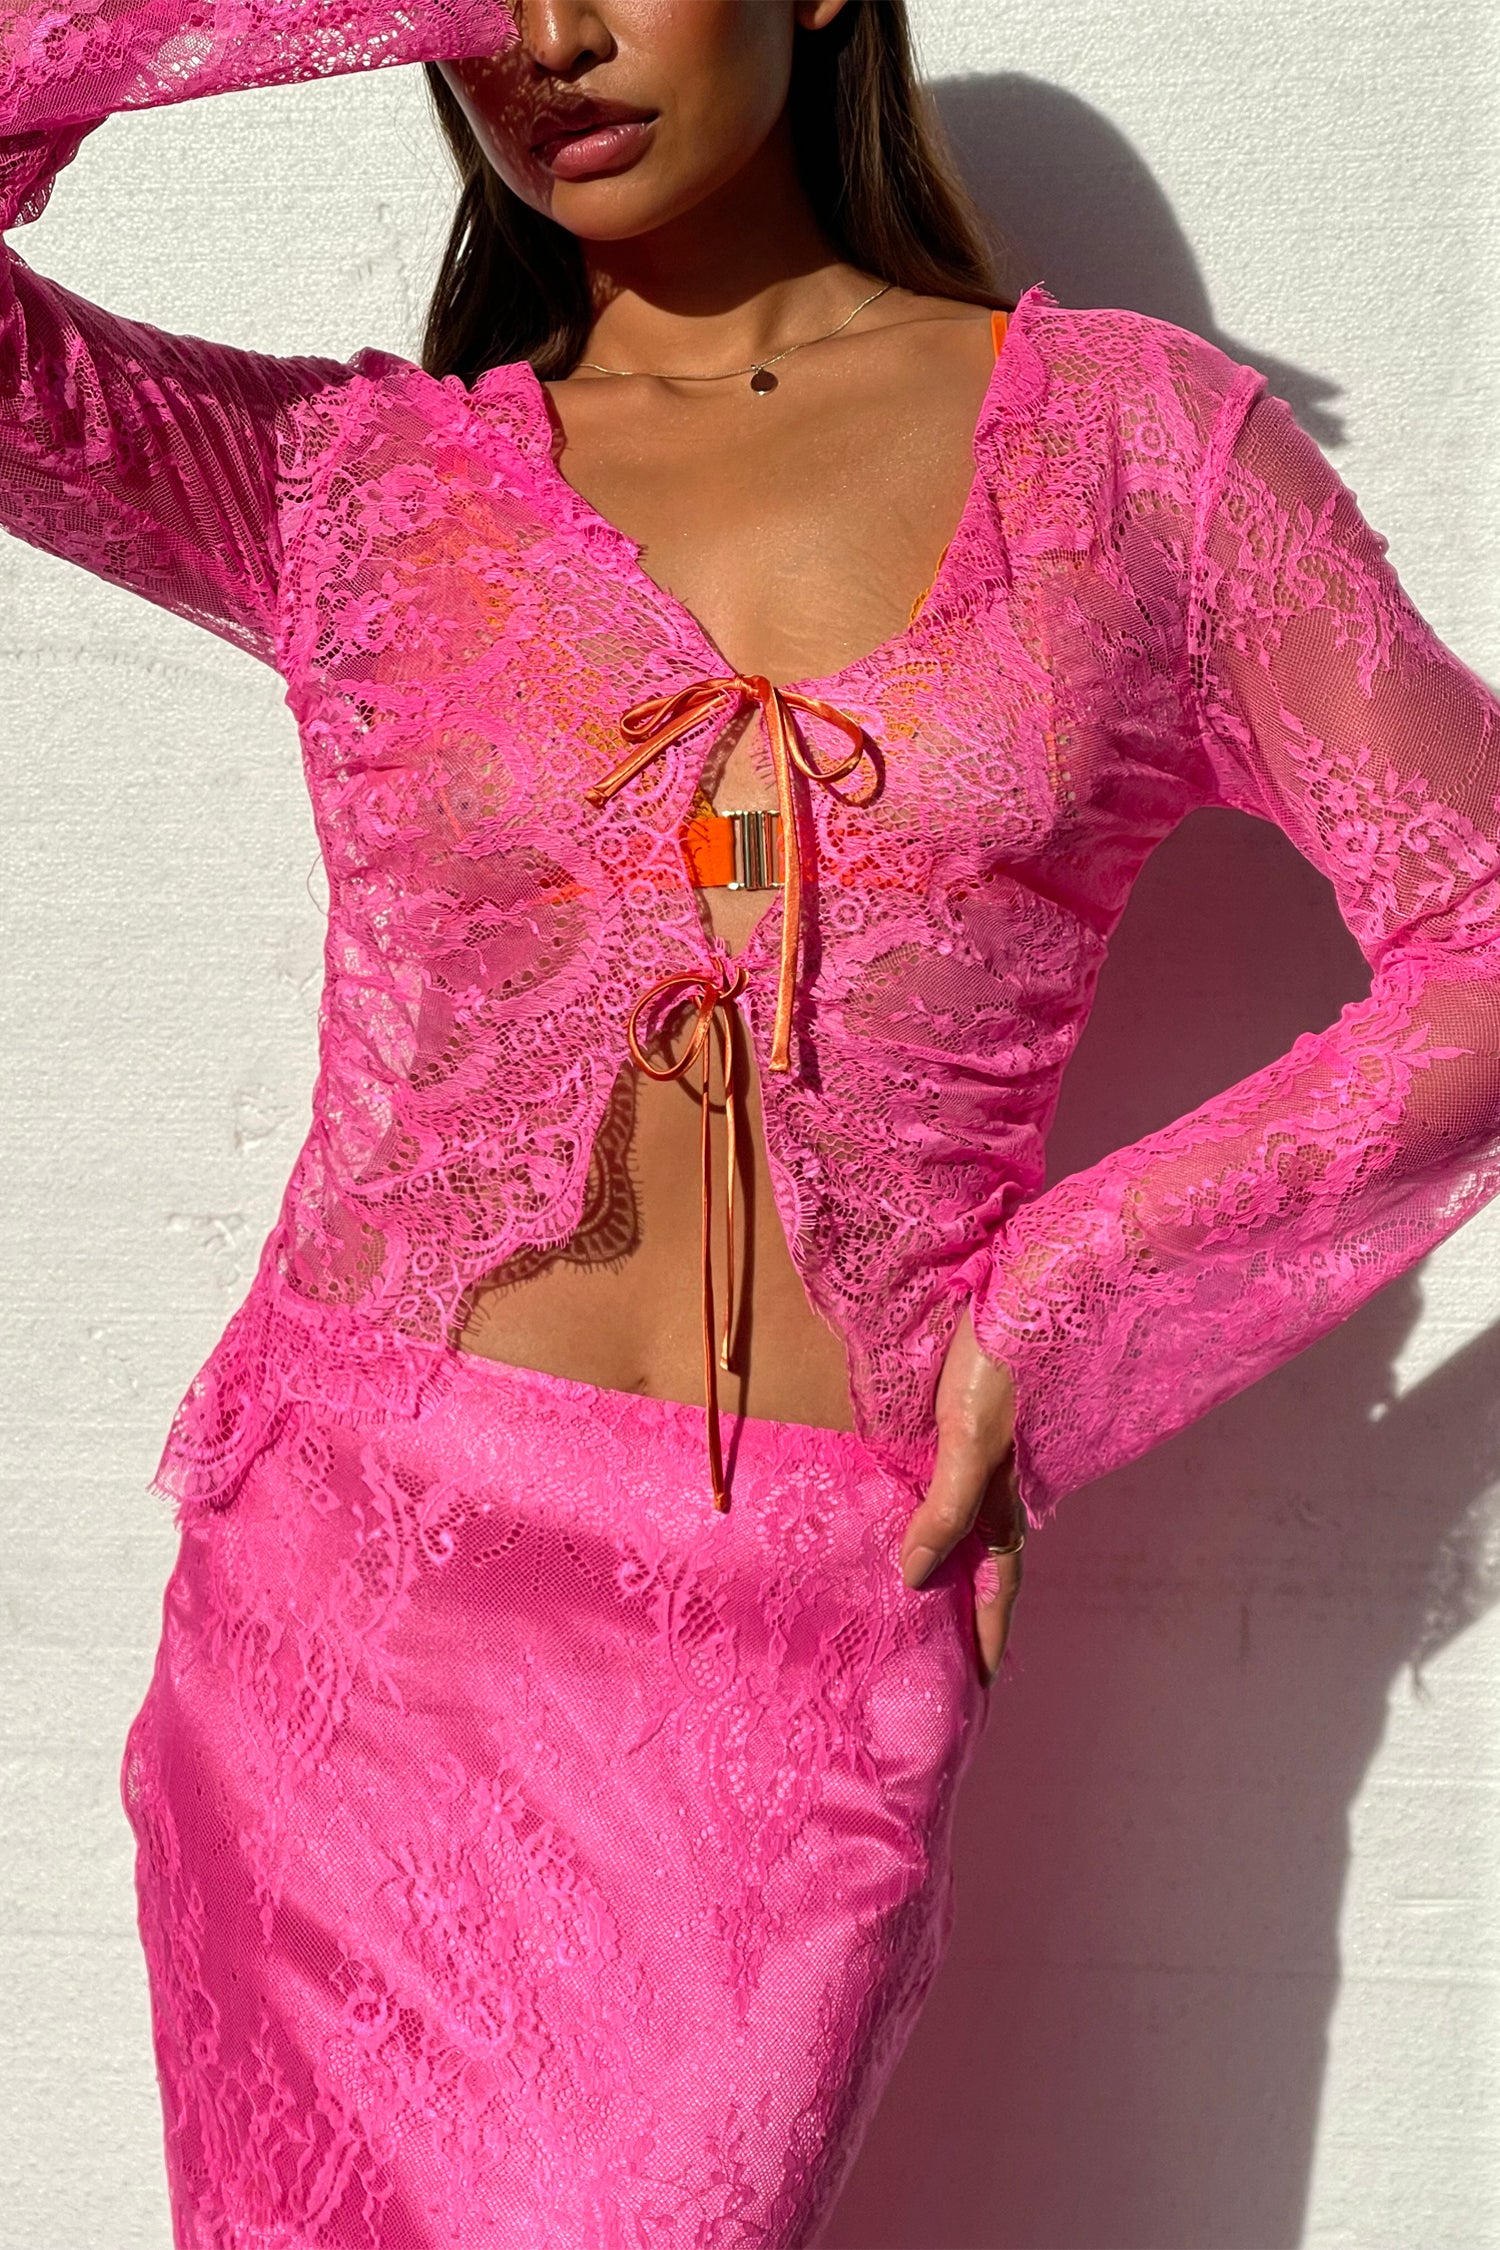 Model wearing Pink Lace Top standing facing the camera close up